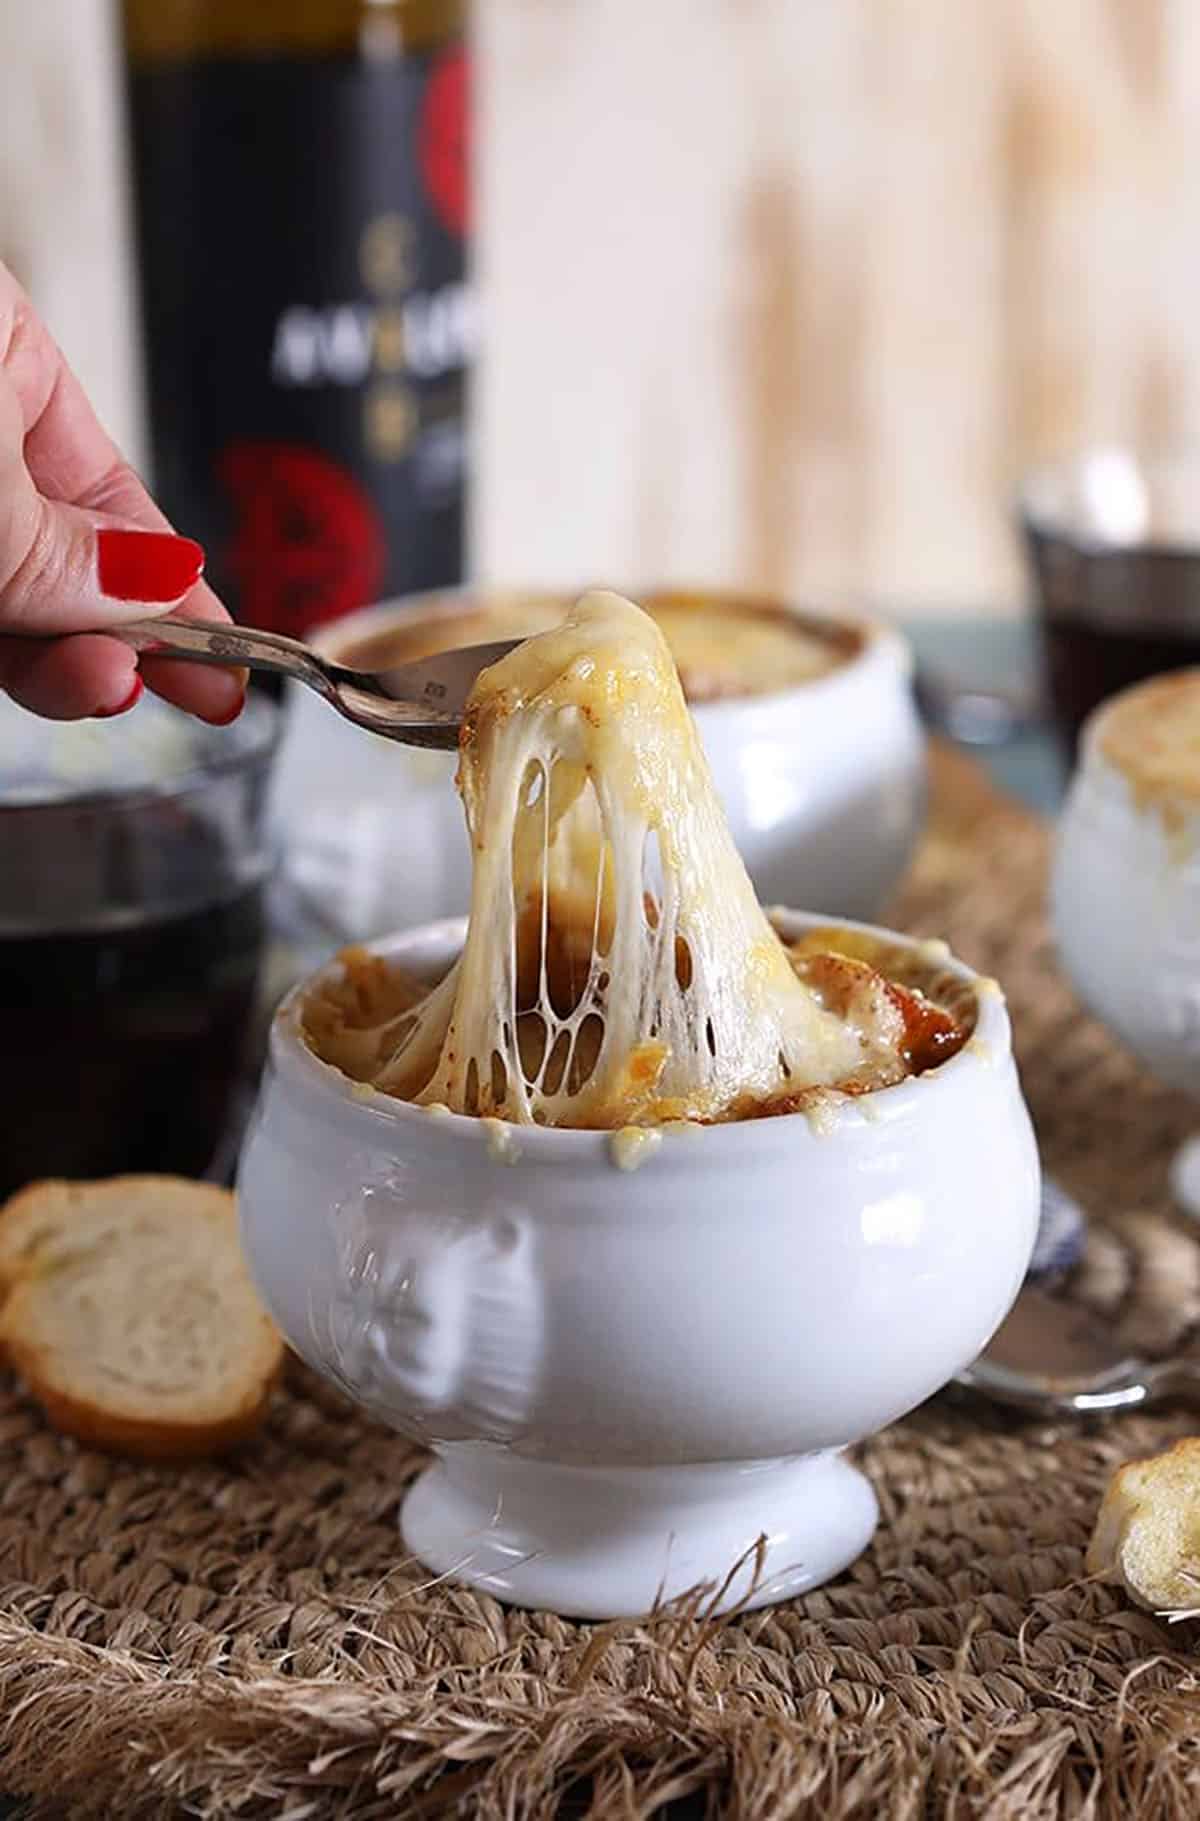 French onion soup in a white crock with a cheese pull on a spoon with a bottle of red wine in the background.